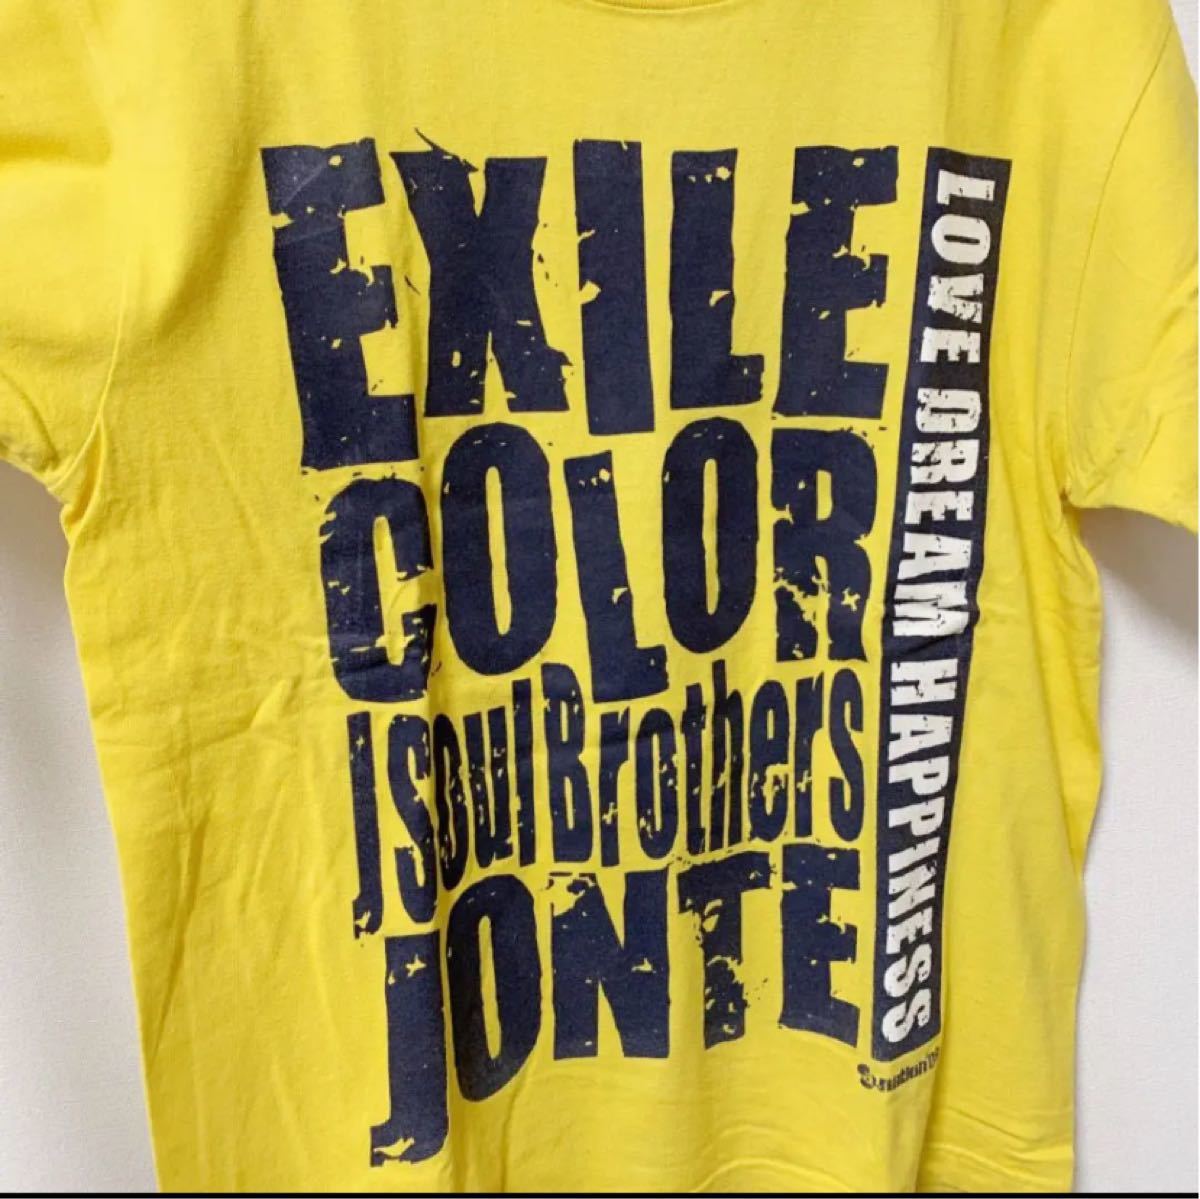 EXILE J Soul Brothers Tシャツ　美品　LDH 希少　レア